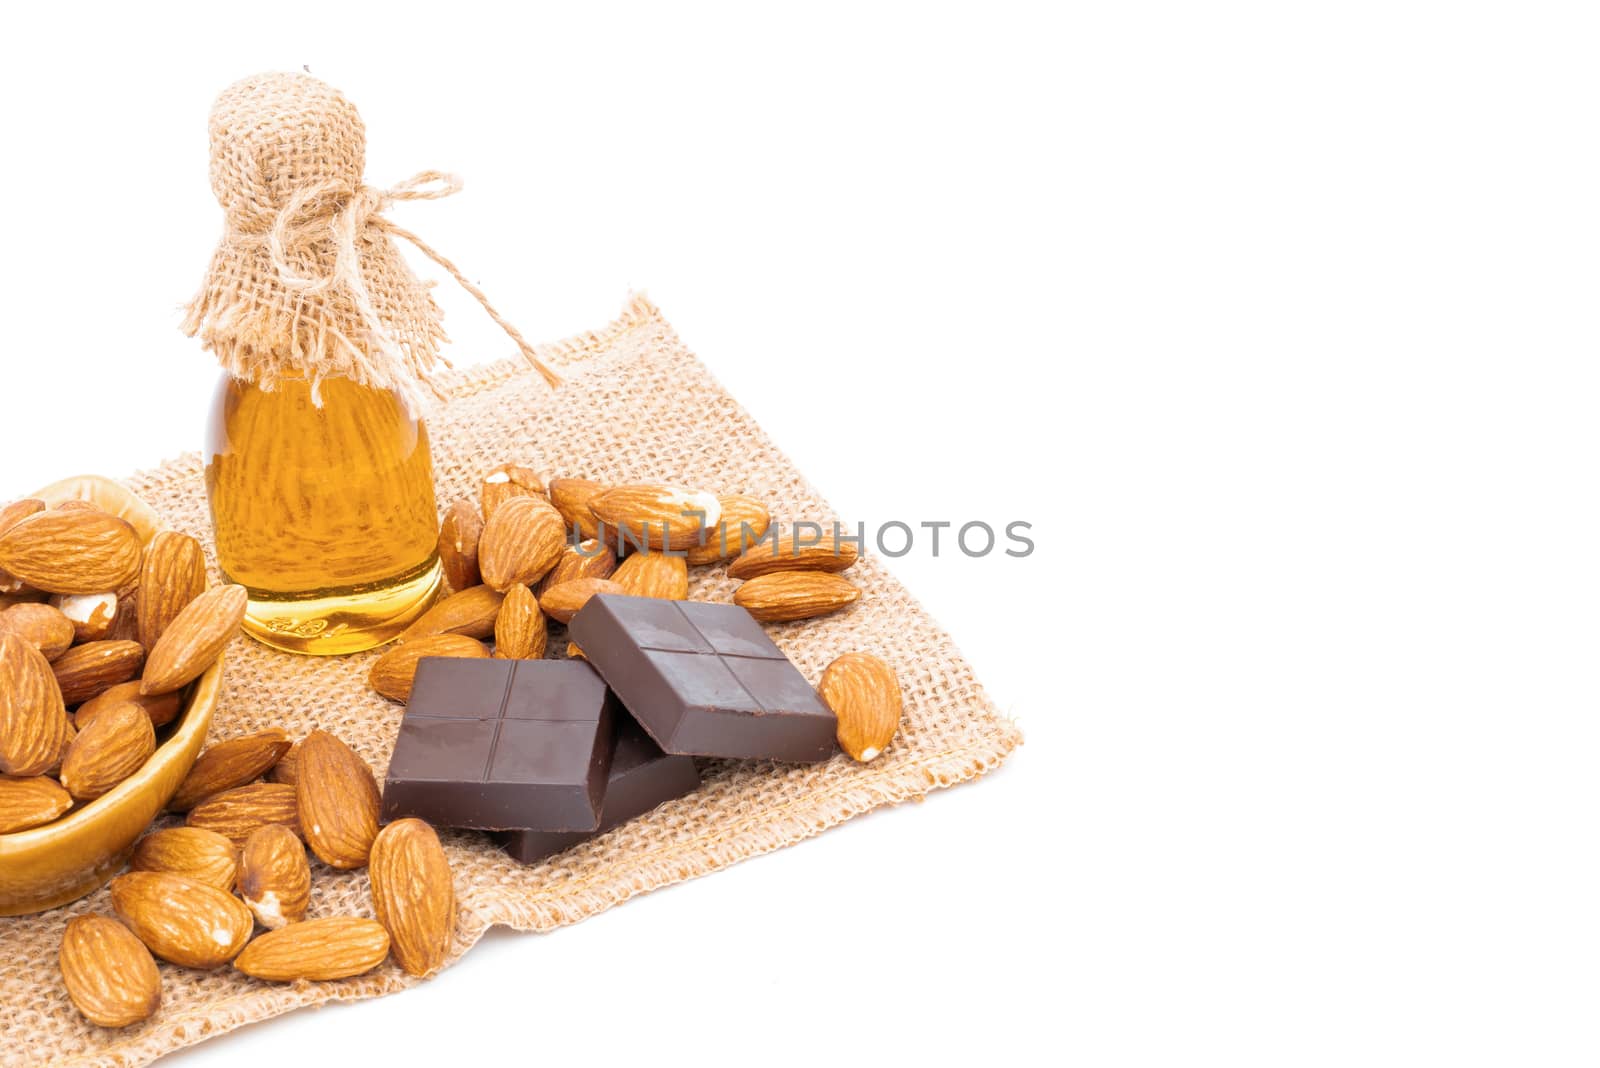 Honey jar chocolate and almonds on a white background by sompongtom